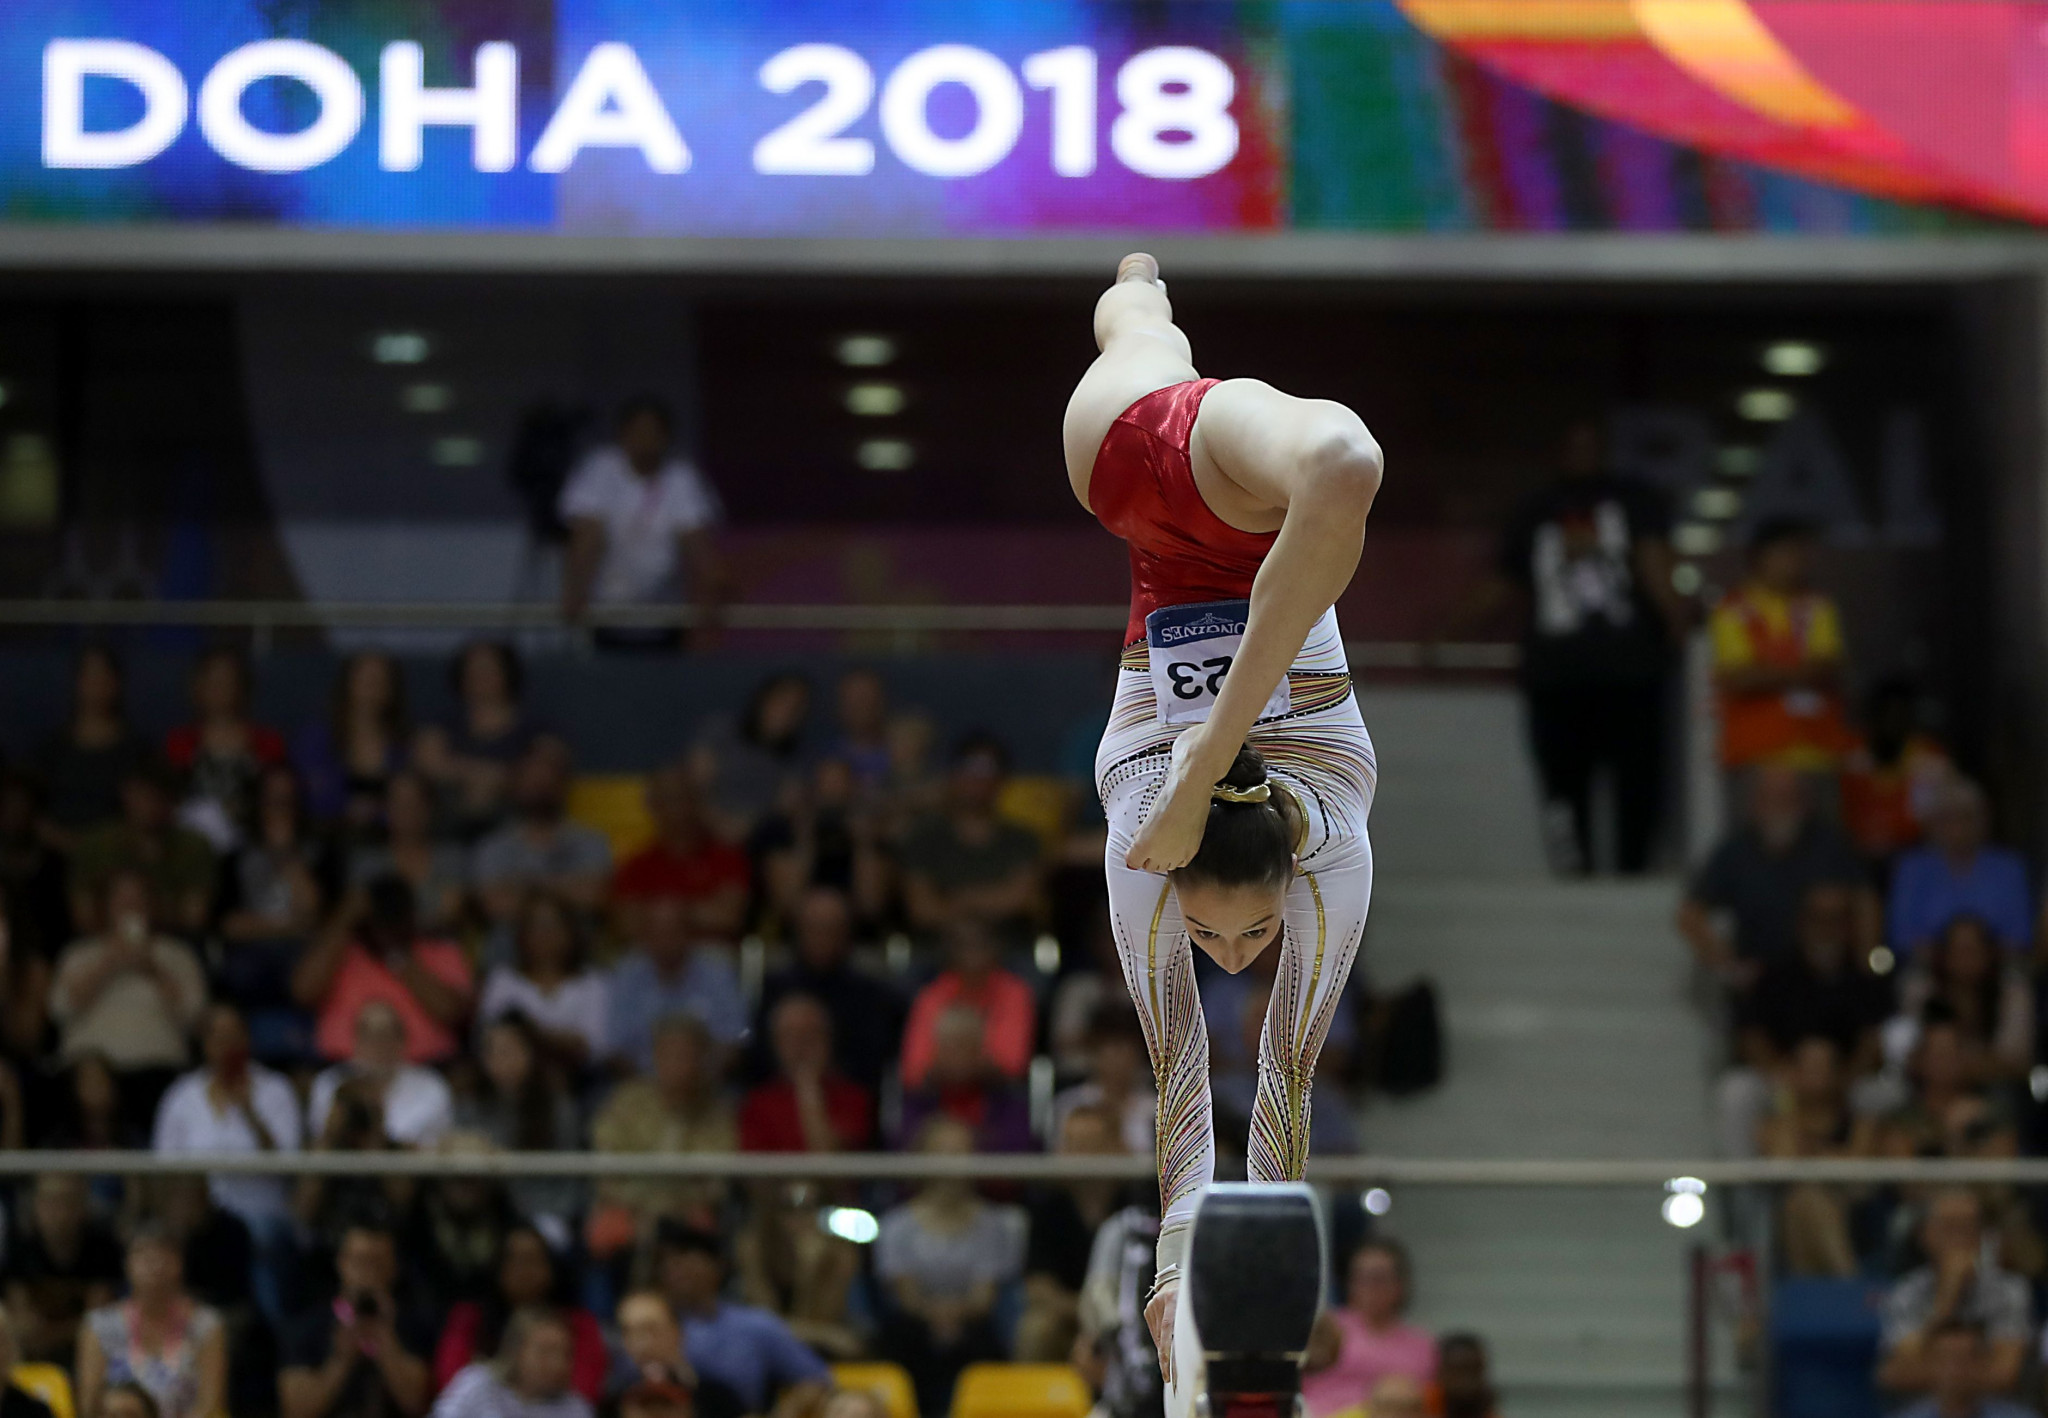 Doha hosted the World Championships in 2018 ©Getty Images